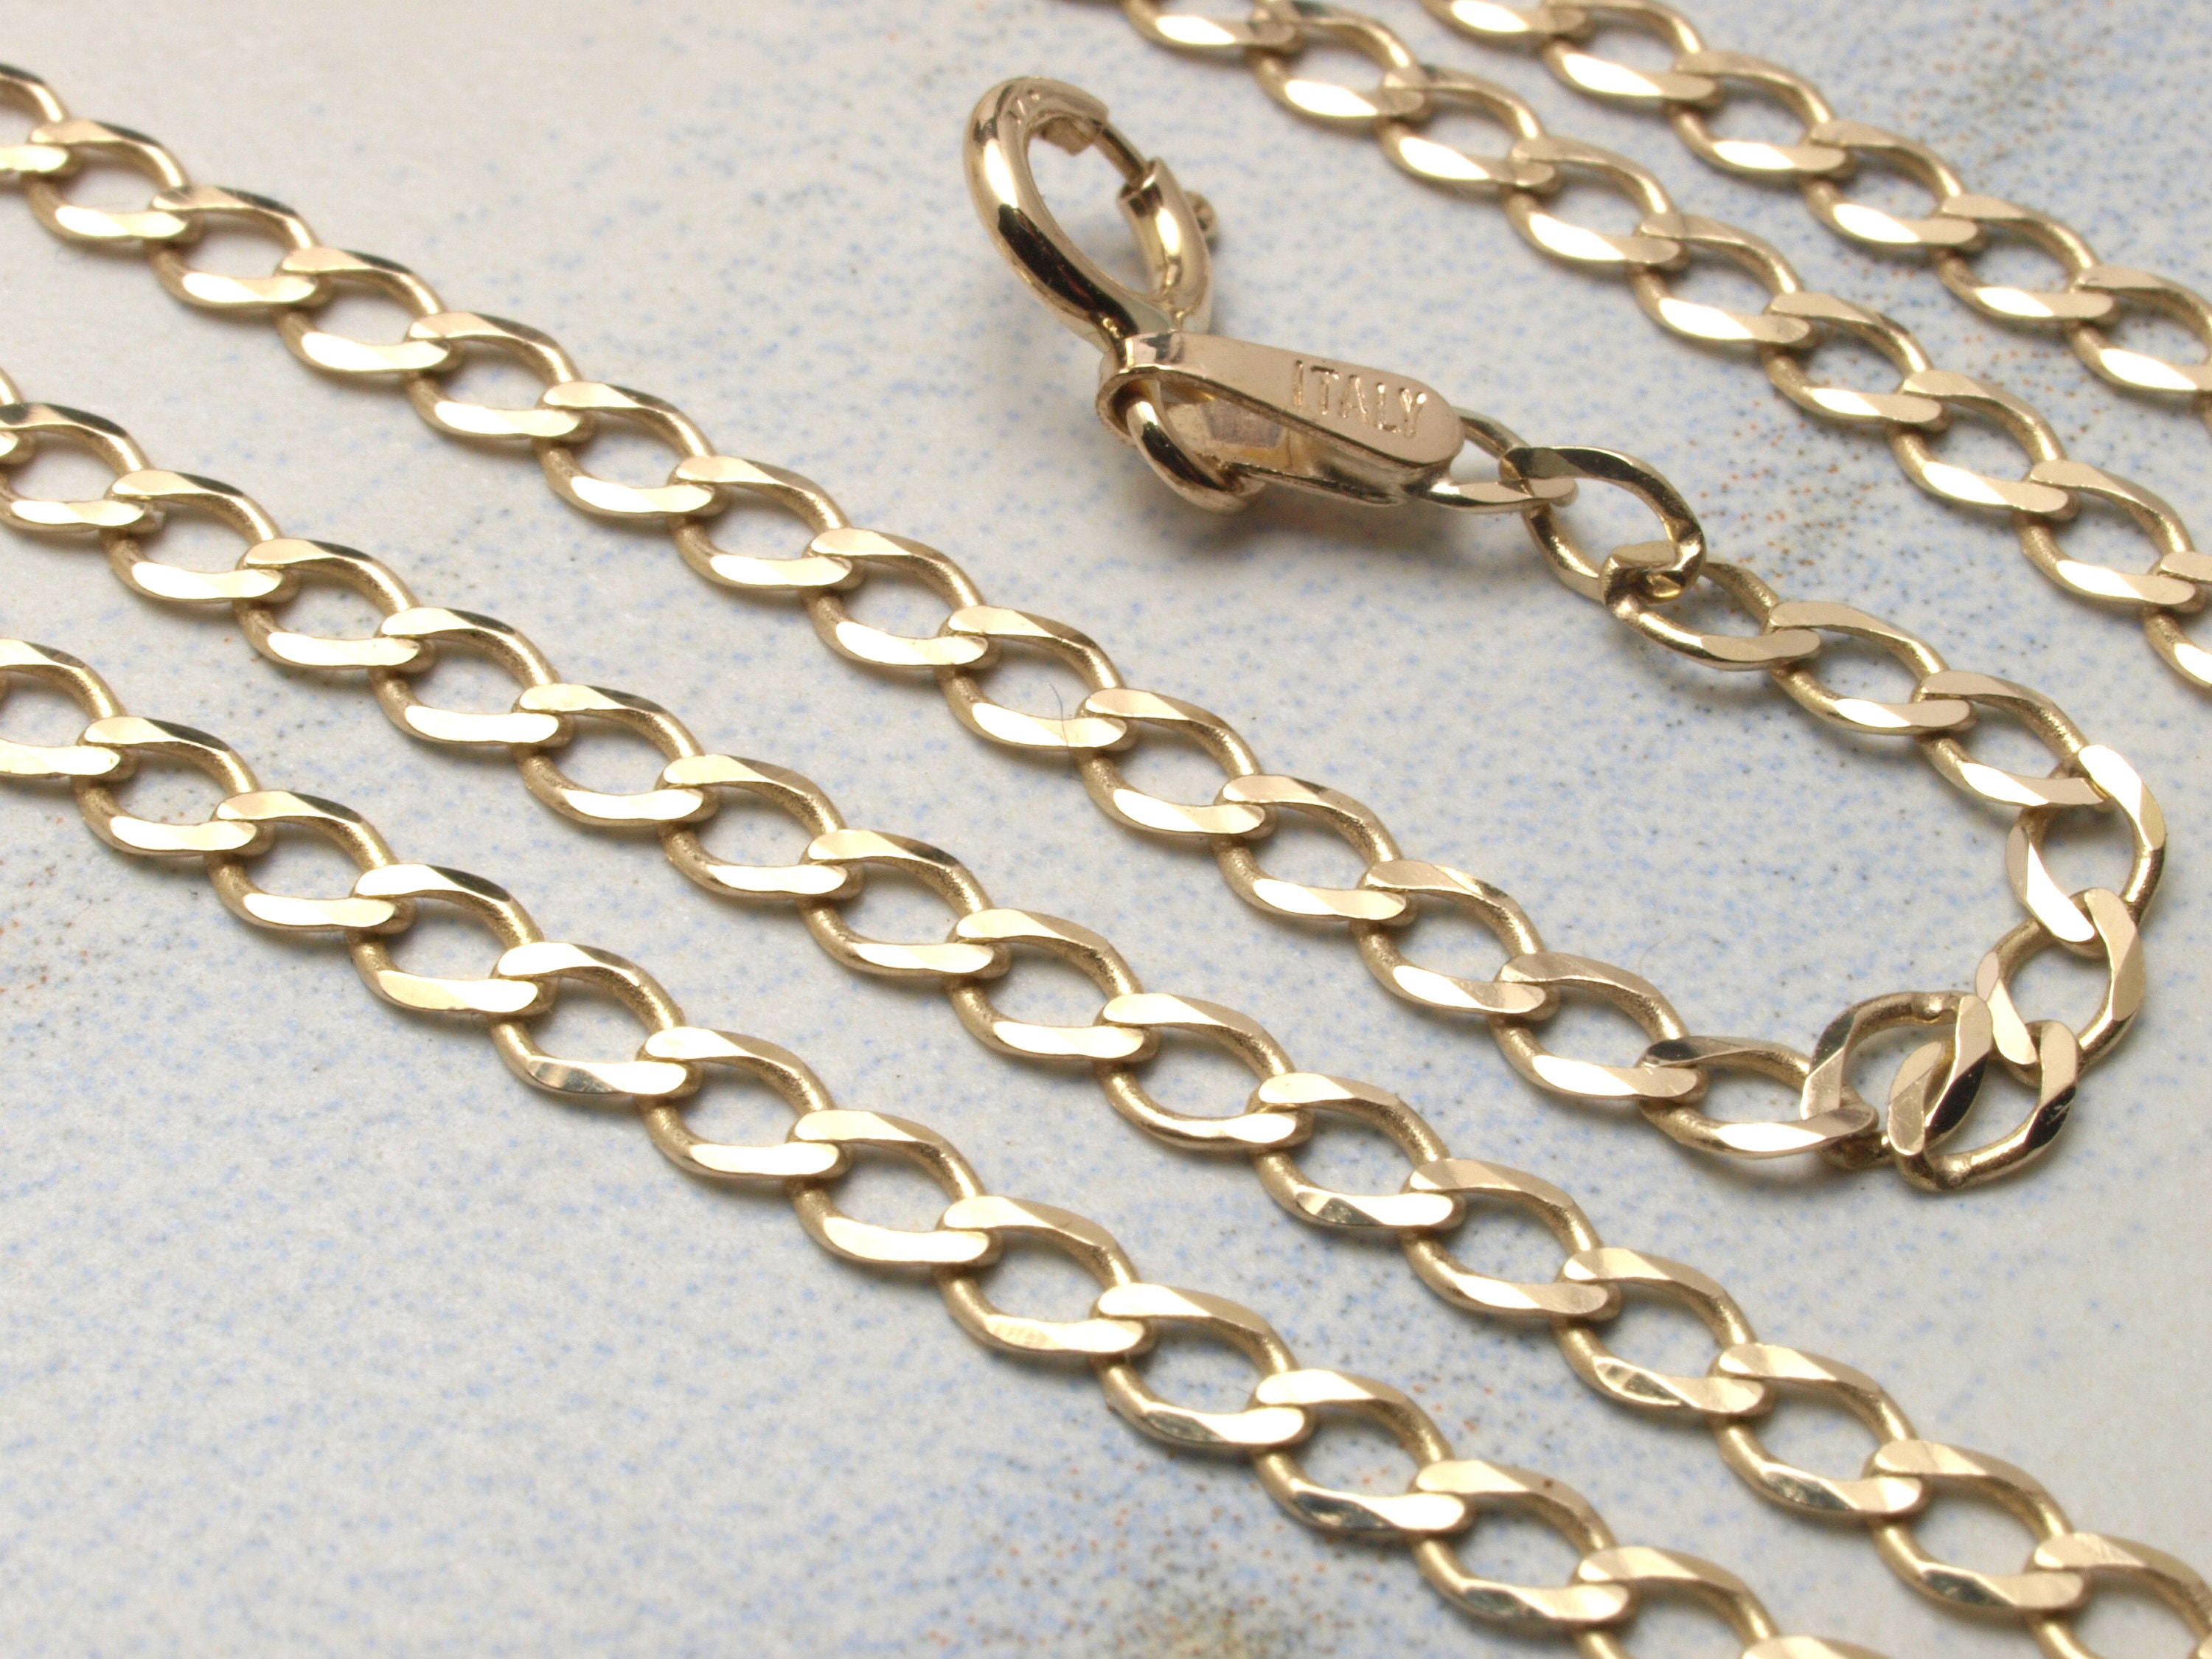 18K Gold Curb Chain 2.5mm Dainty Small Gold Necklace Slick Chain